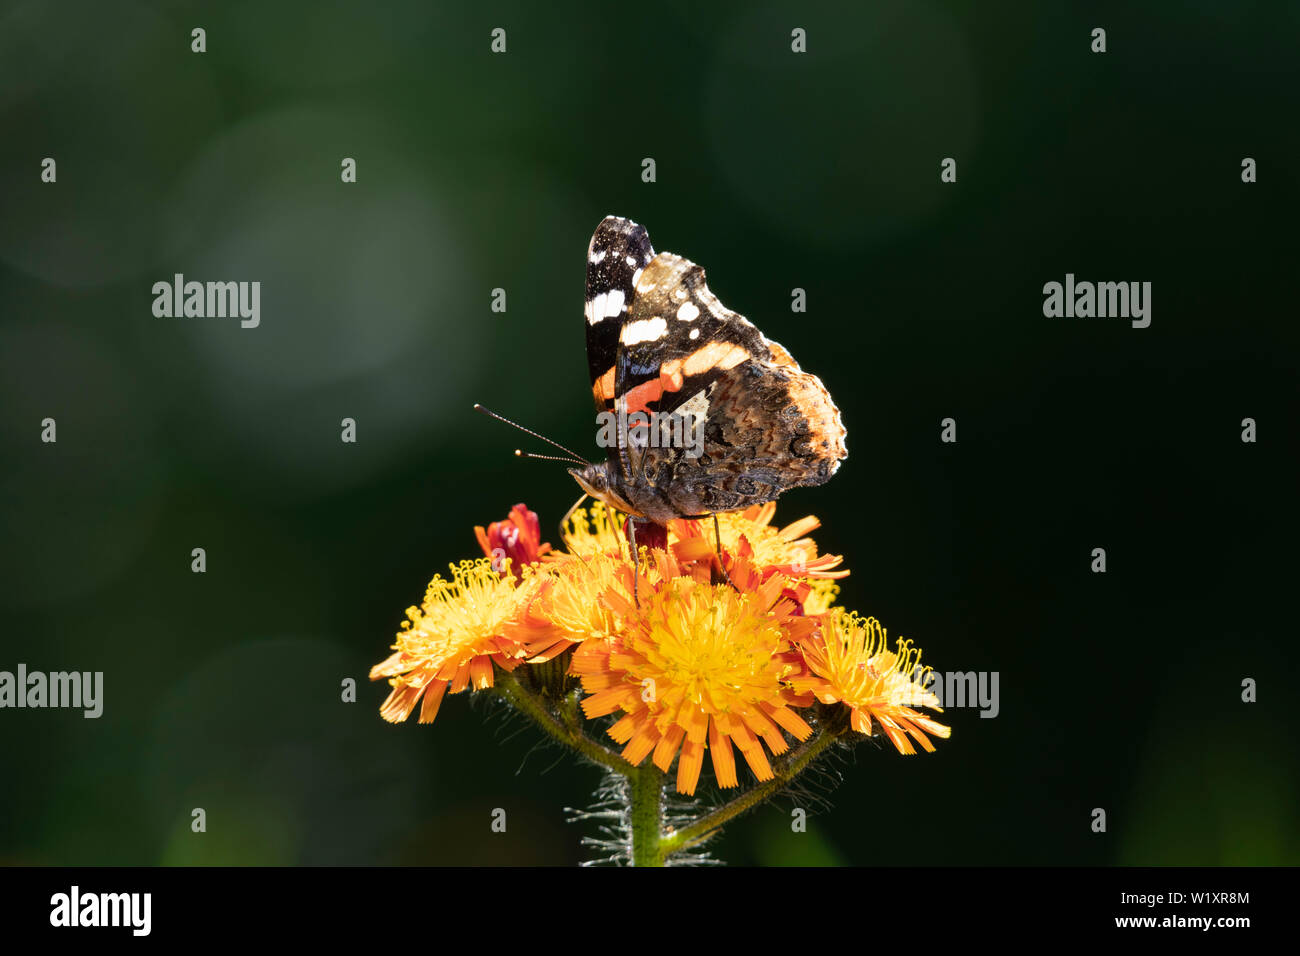 A Red Admiral Butterfly (Vanessa Atalanta) Feeding on 'Orange Hawkweed' (Hieracium Aurantiacum), Also Known as 'Missionary Weed' Stock Photo